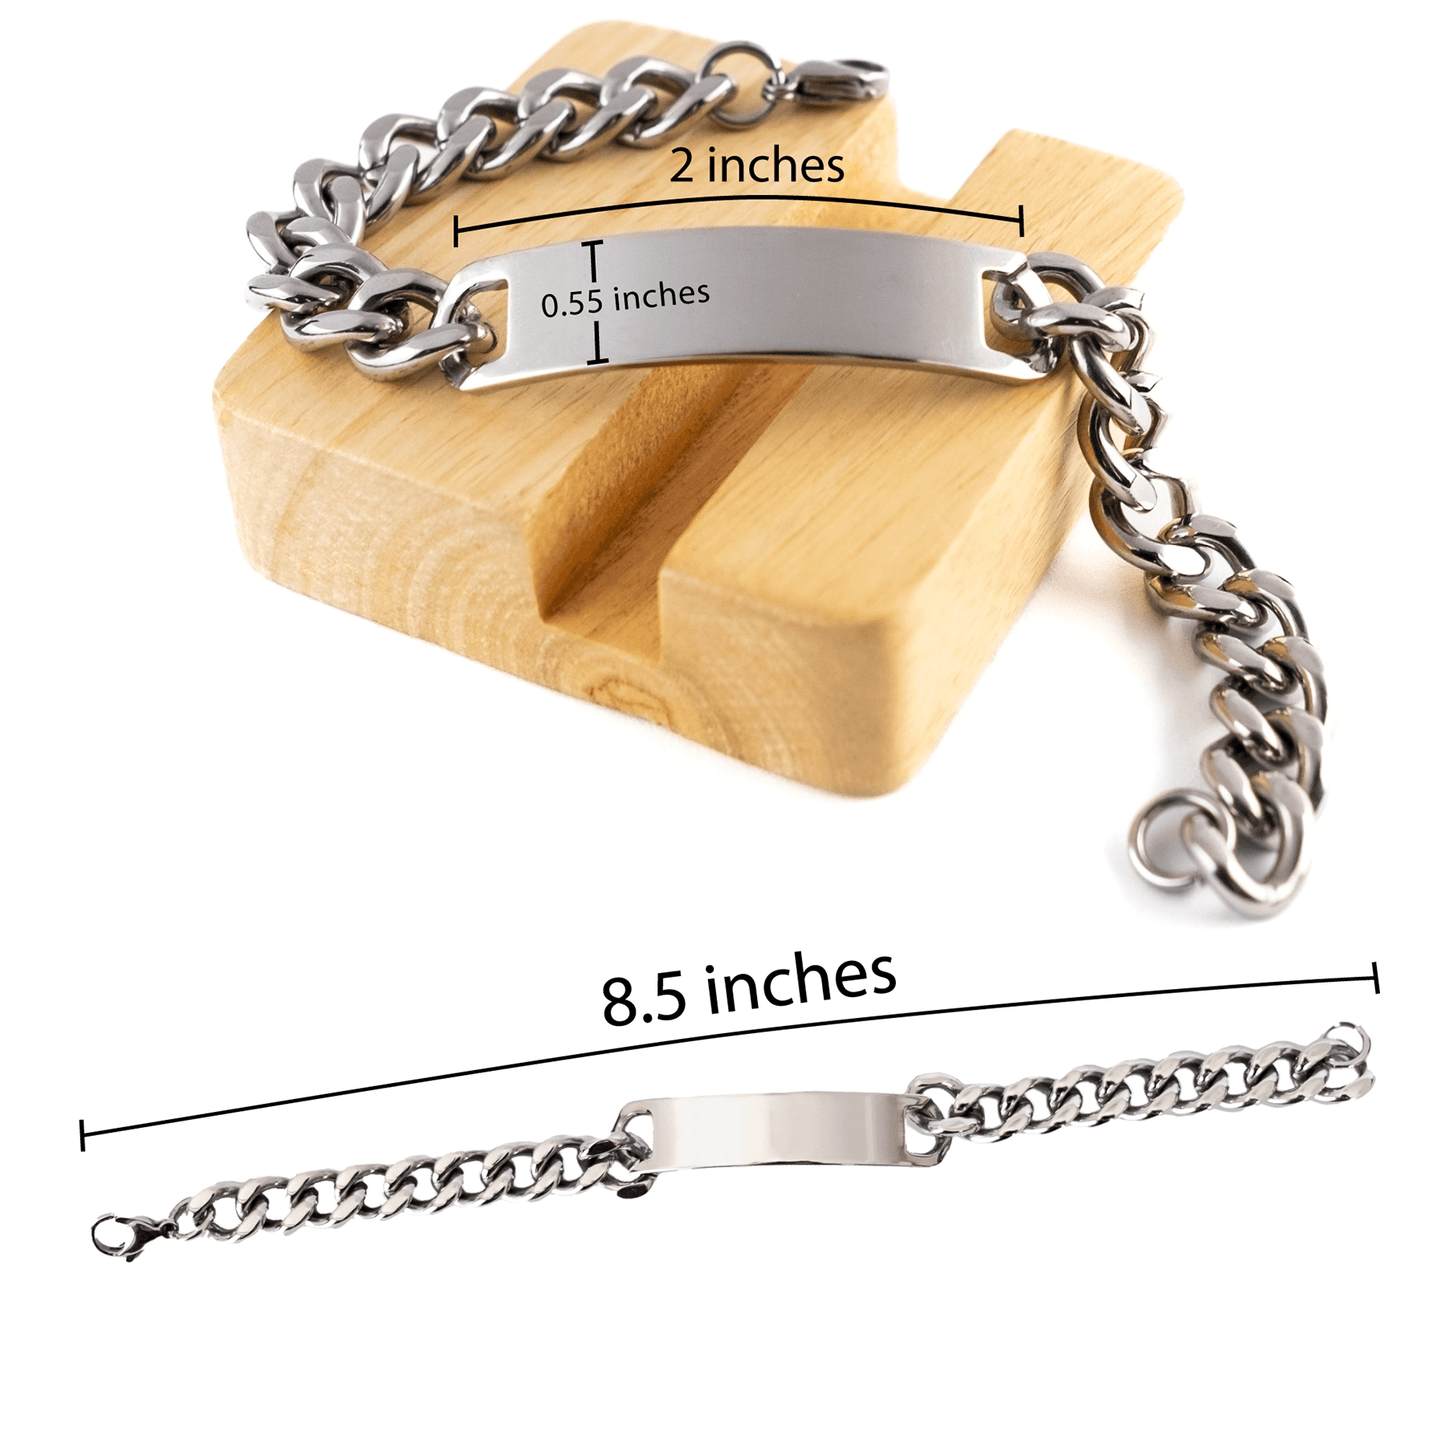 Dog Groomer Cuban Chain Link Engraved Bracelet - Thanks for being who you are - Birthday Christmas Jewelry Gifts Coworkers Colleague Boss - Mallard Moon Gift Shop